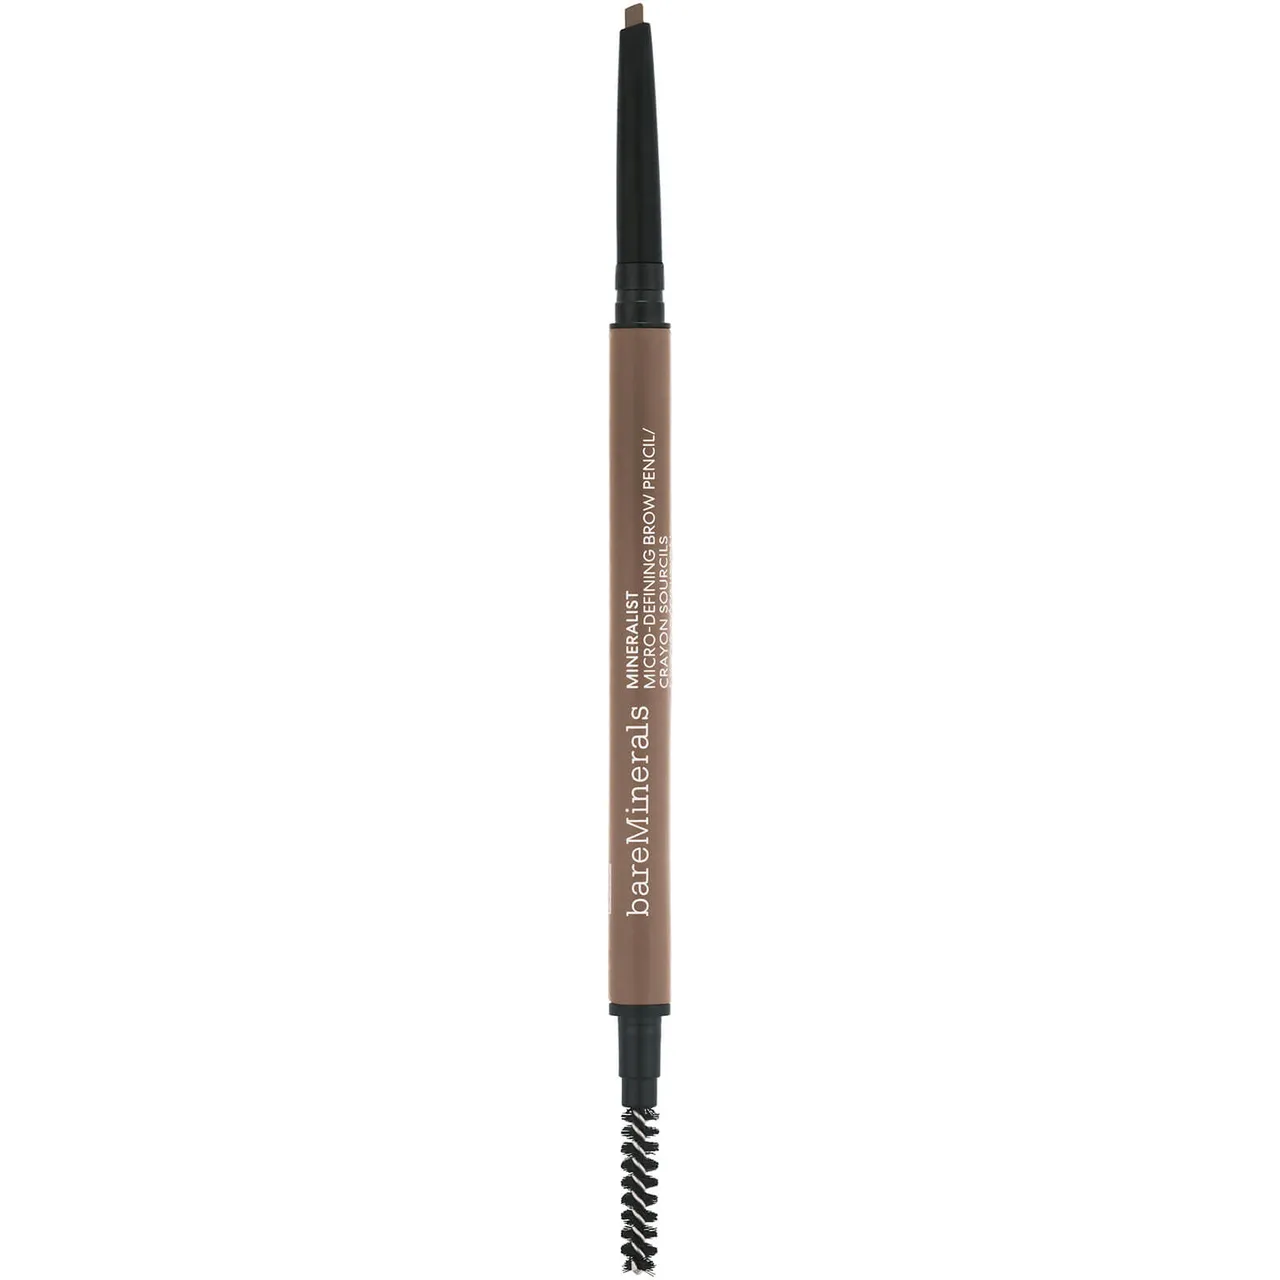 bareMinerals Mineralist MicroDefining Brow Pencil 0.08g (Various Shades) - Light Brown